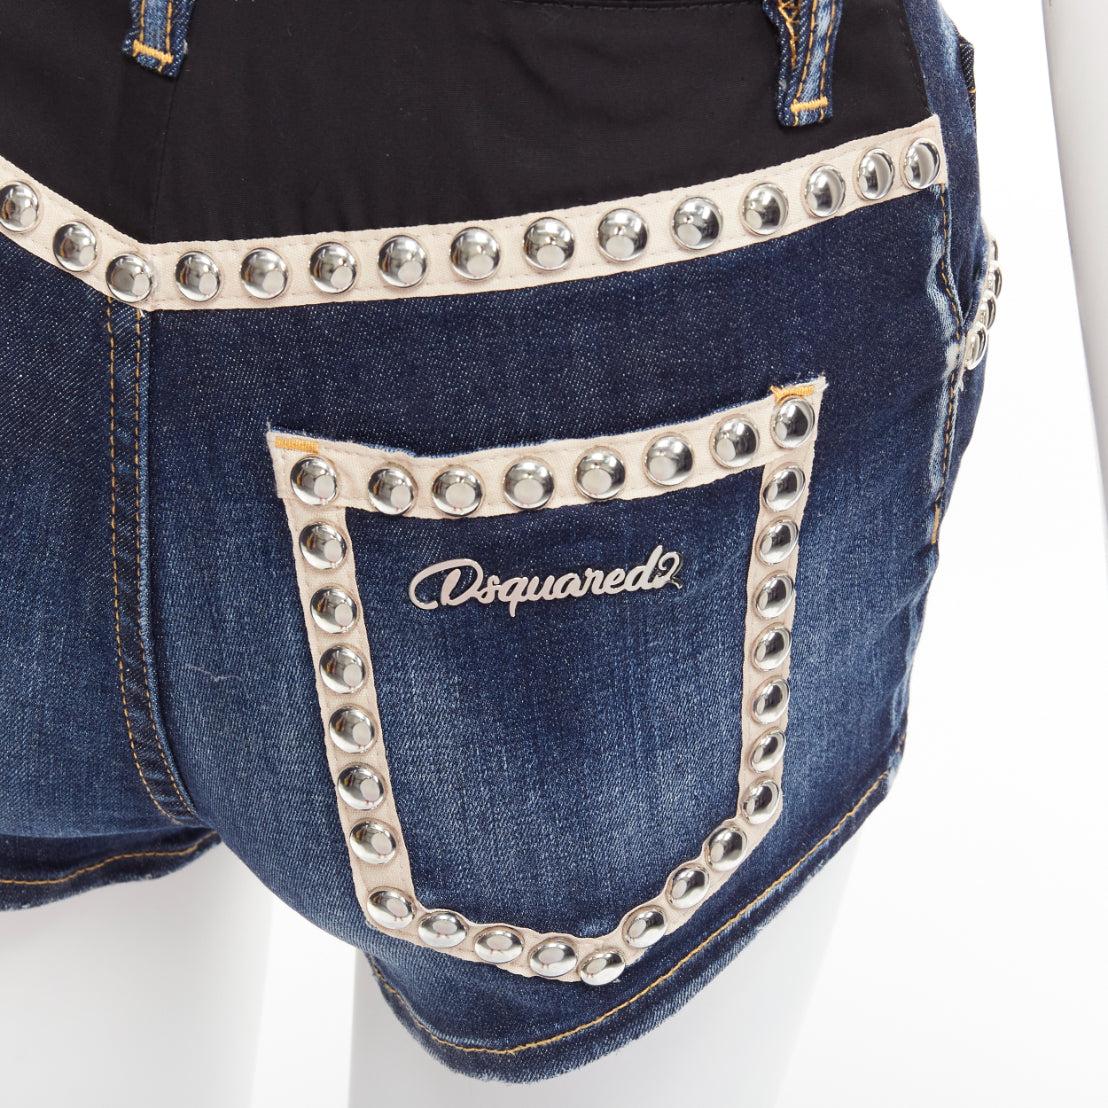 DSQUARED2 silver dome studs blue washed denim beige trim hot shorts IT40 S
Reference: AAWC/A00970
Brand: Dsquared2
Material: Denim, Fabric, Metal
Color: Blue, Beige
Pattern: Solid
Closure: Button Fly
Lining: Blue Fabric
Extra Details: DSQUARED2 logo